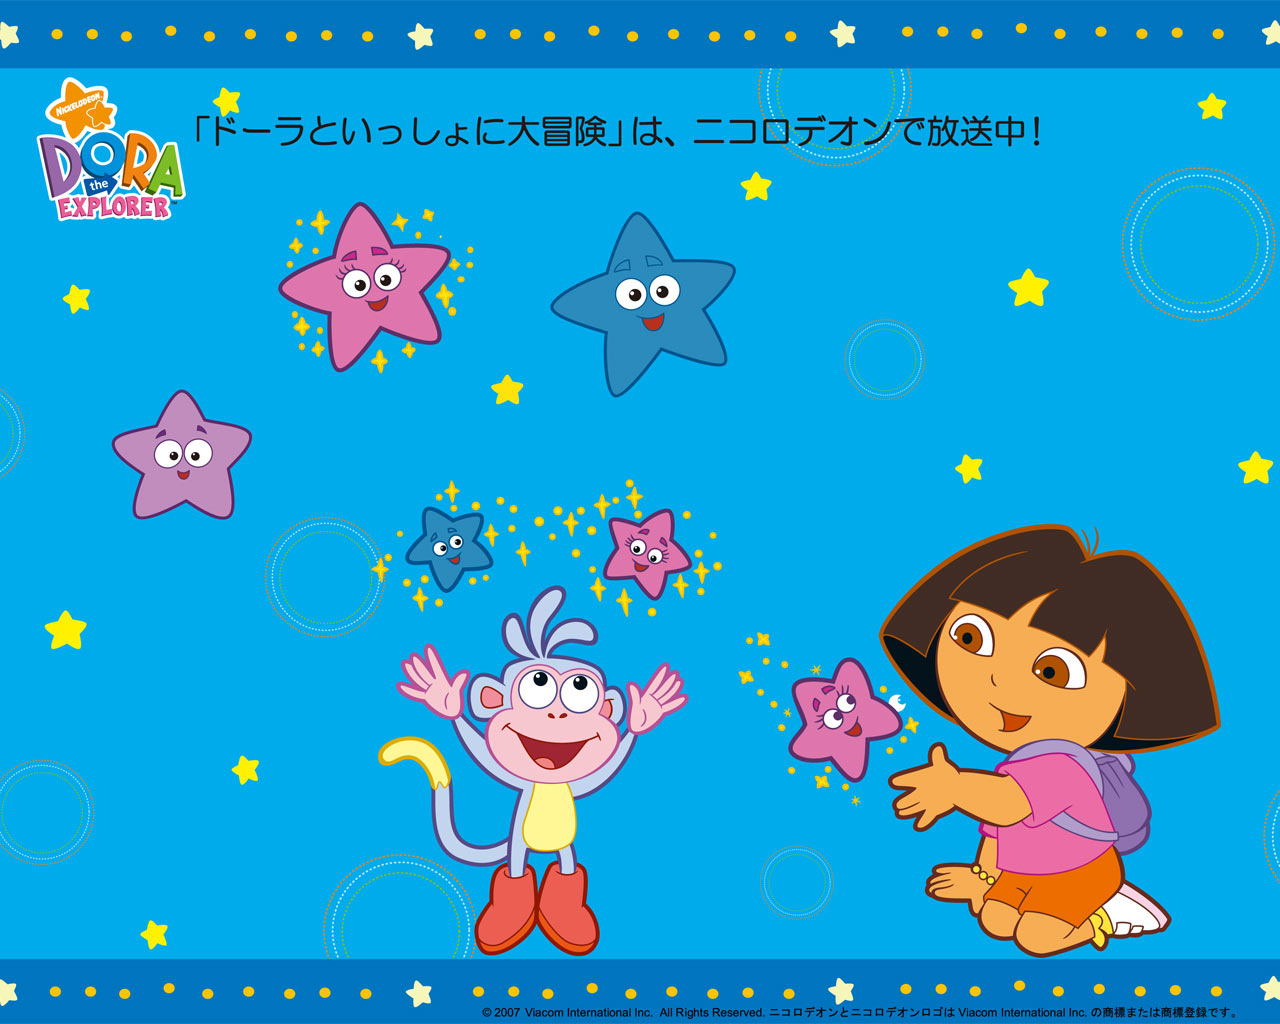 Blue Dora the Explorer Wallpaper with stars and boots